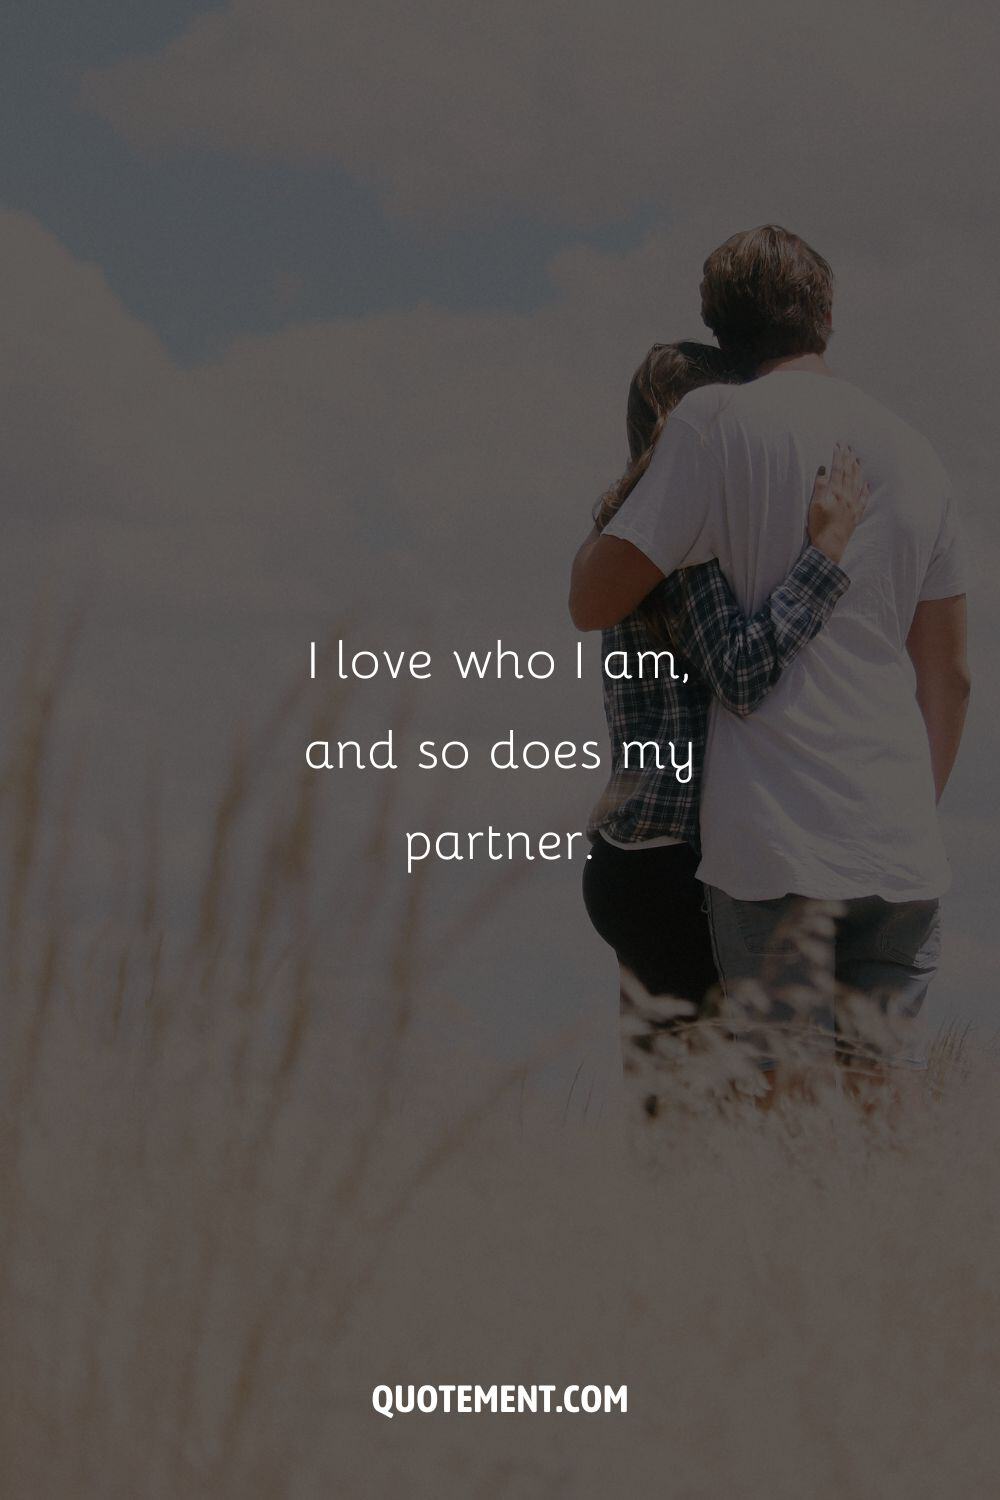 Two people in a close embrace representing an affirmation for a healthy relationship.
